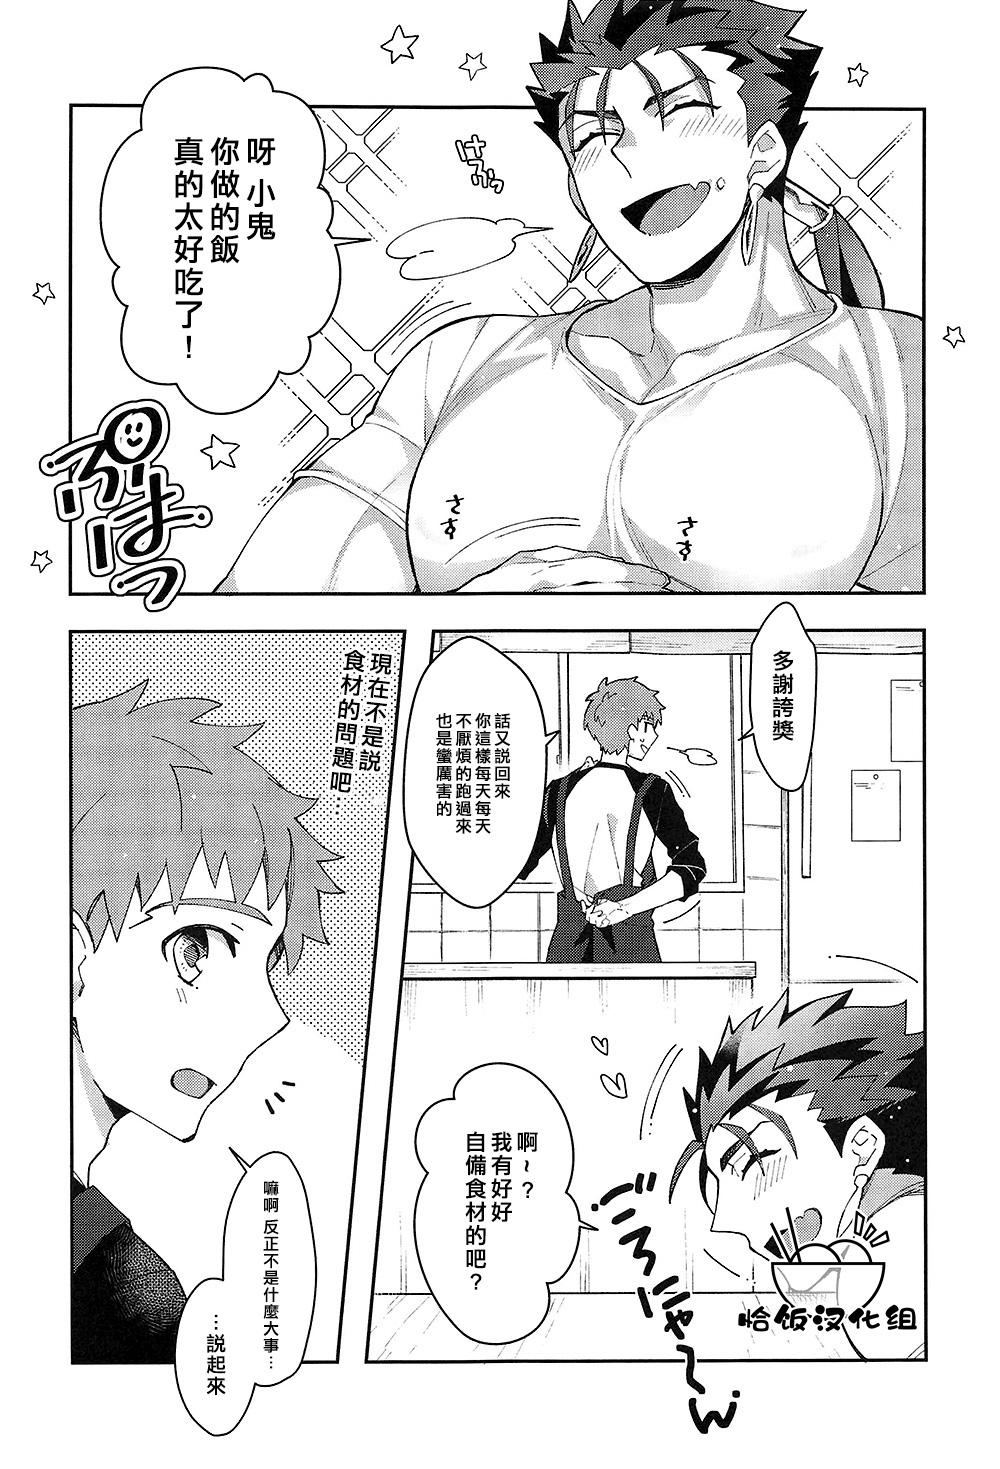 Clothed 坊主の飯が美味いせいで乳から魔力がとまらない！ - Fate stay night Bang Bros - Page 4